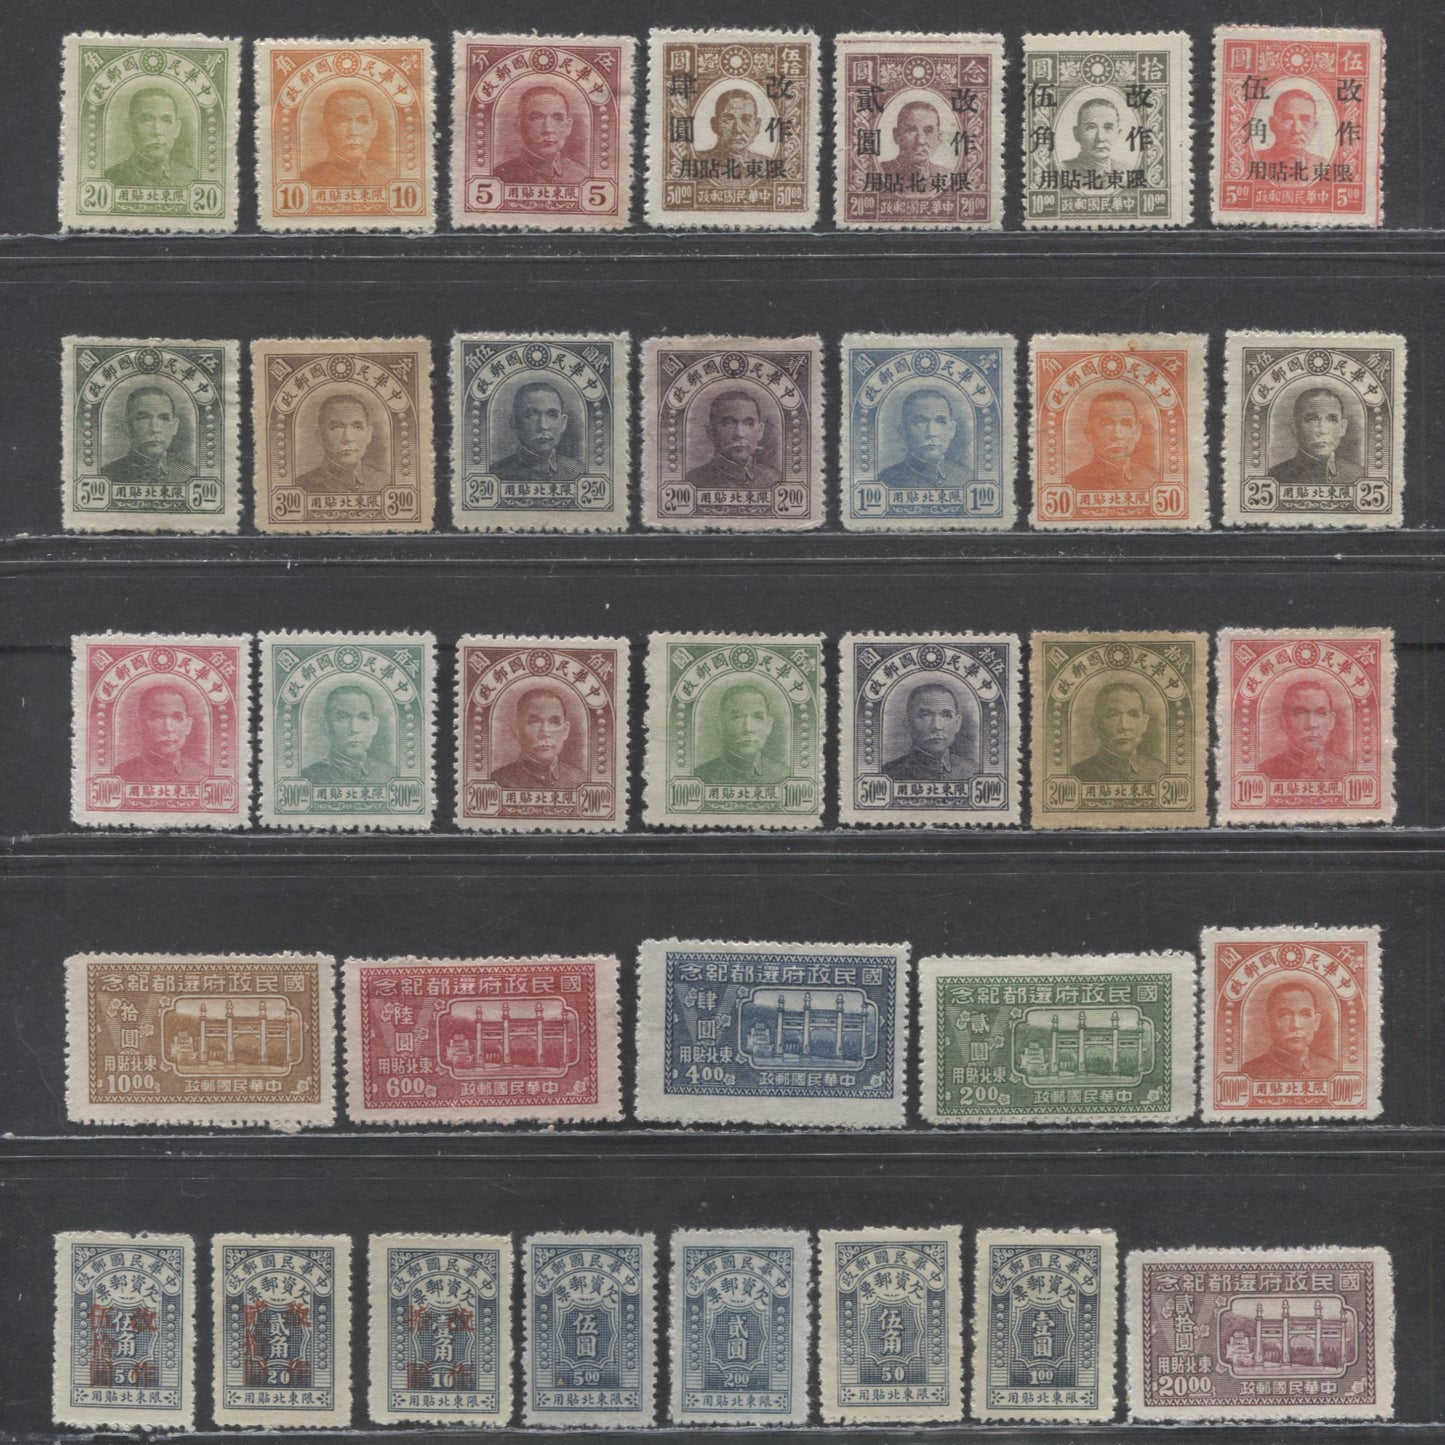 Lot 445 China - North Eastern Provinces SC#1/J9 1946 Definitives & Postage Dues, 34 F/VFUN (No Gum As Issued) Singles, Click on Listing to See ALL Pictures, 2017 Scott Cat. $11.9 USD